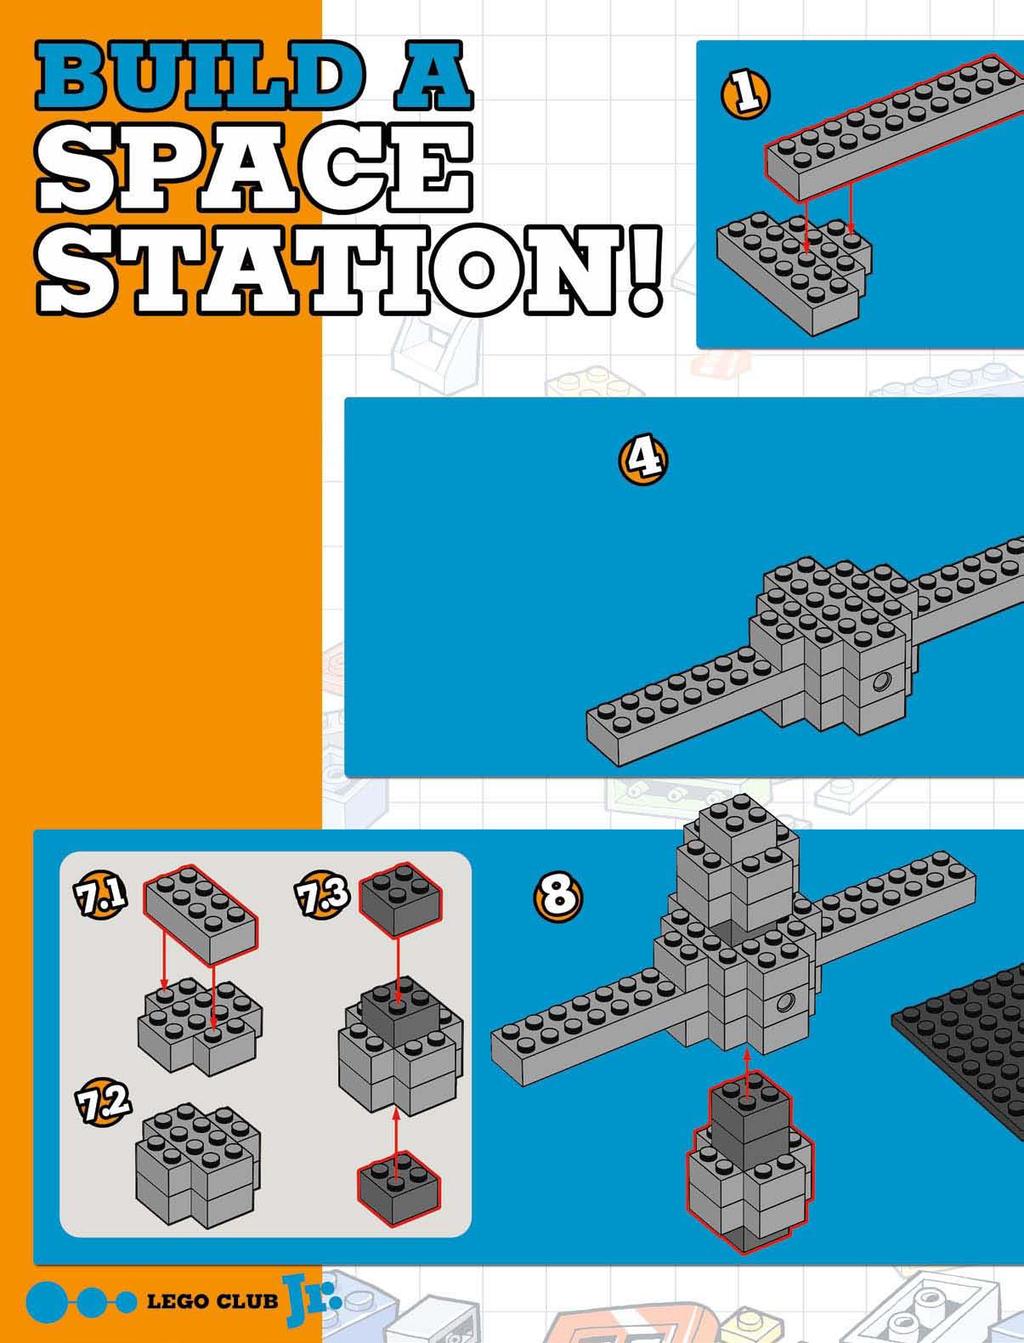 H ere s a new space station to go into orbit around the Earth! You can build it using pieces from your LEGO collection. Don t worry if the colors don t match use whatever colors you like!